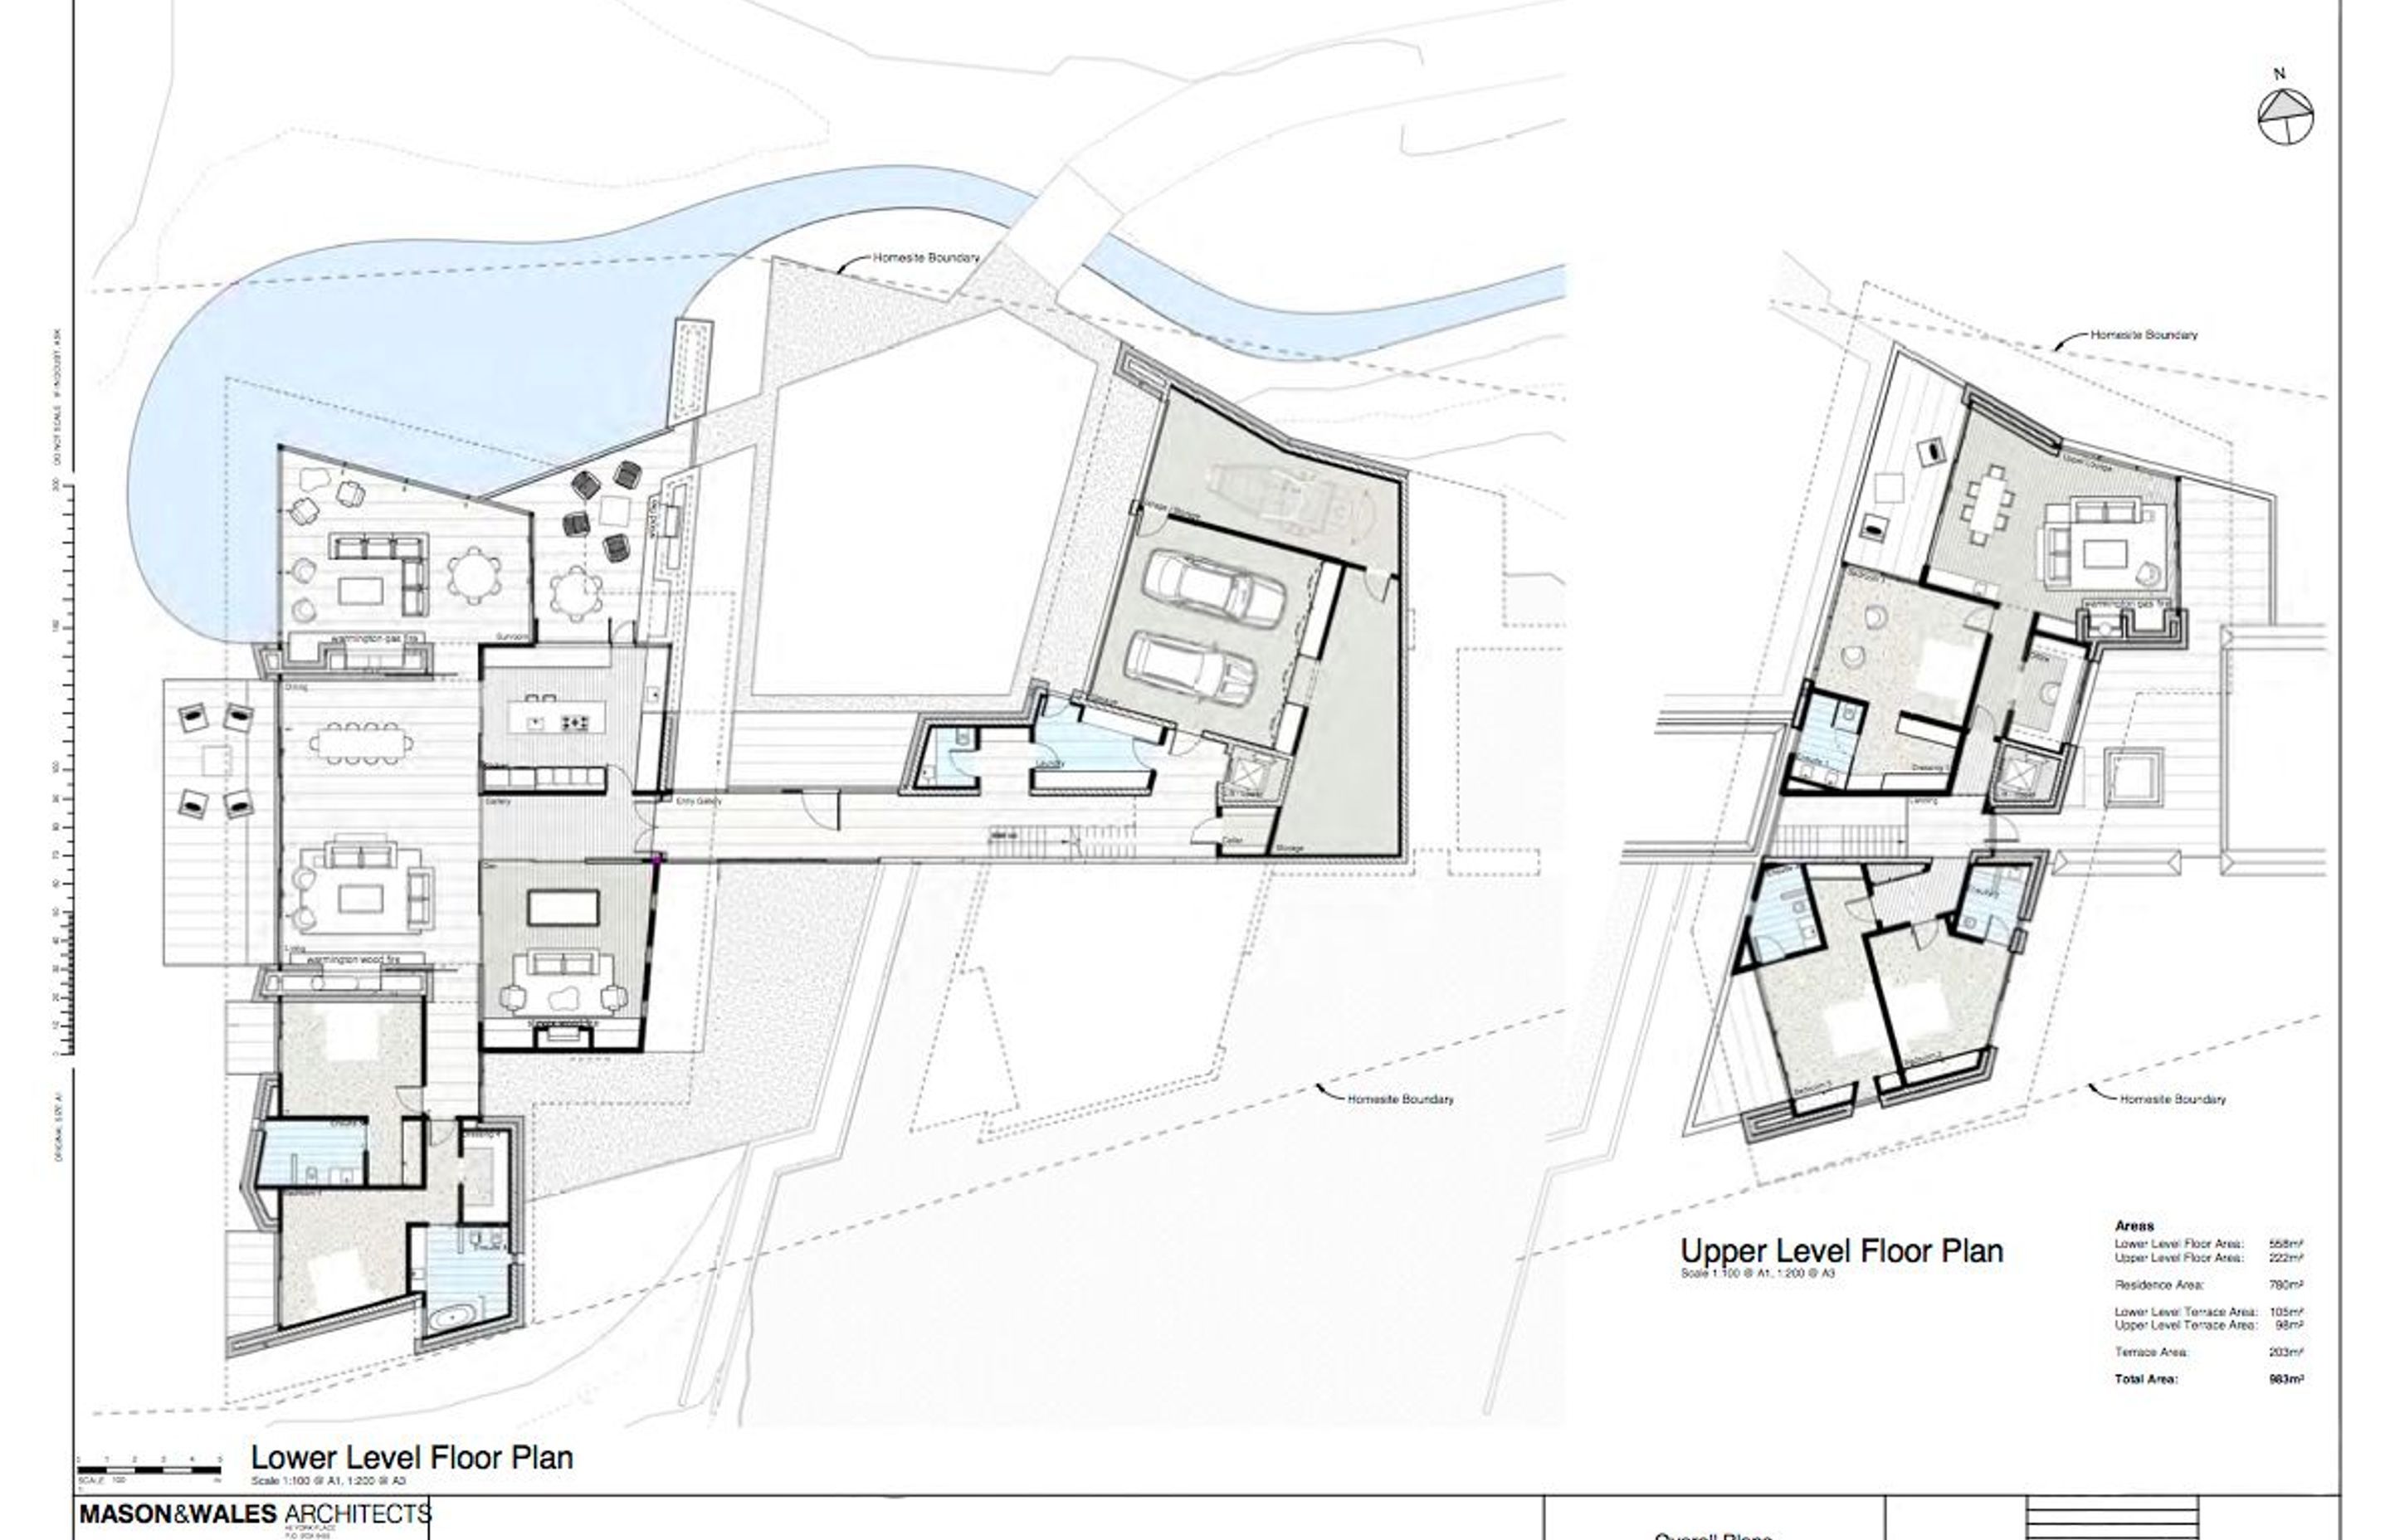 The lower-level and upper-level floor plans of Hidden Island Retreat. Drawing by Mason and Wales Architects.